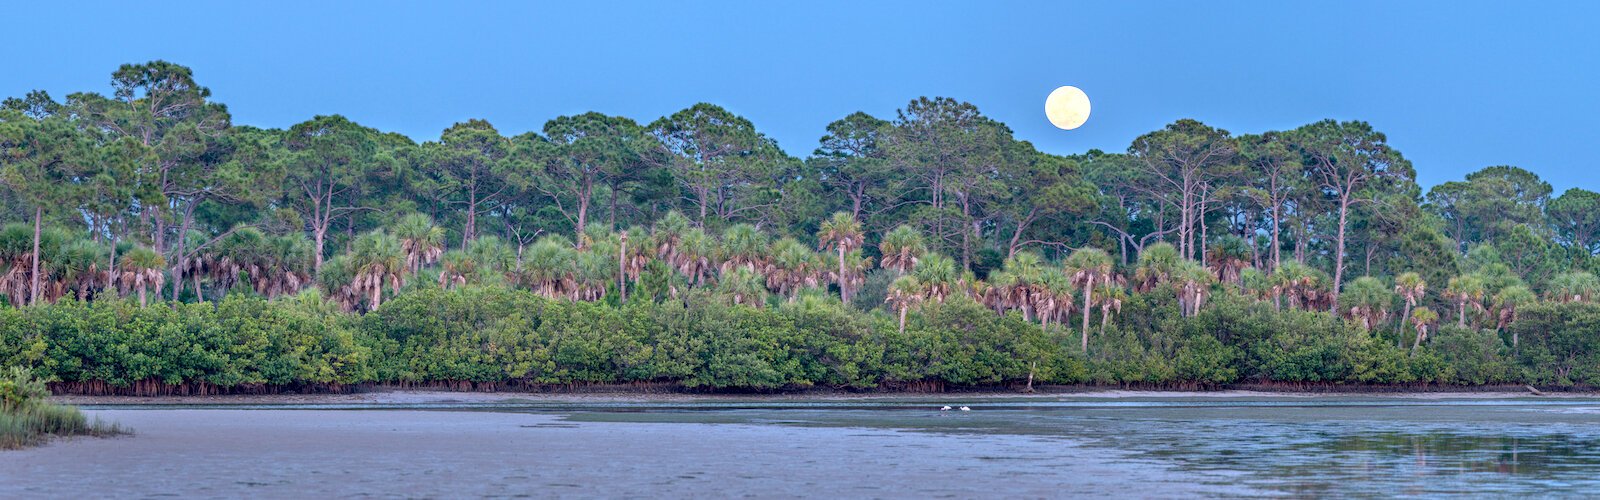 The goal of the Florida Wildlife Corridor is to connect the state's remaining green patches, providing pathways for wildlife dispersal and roaming.